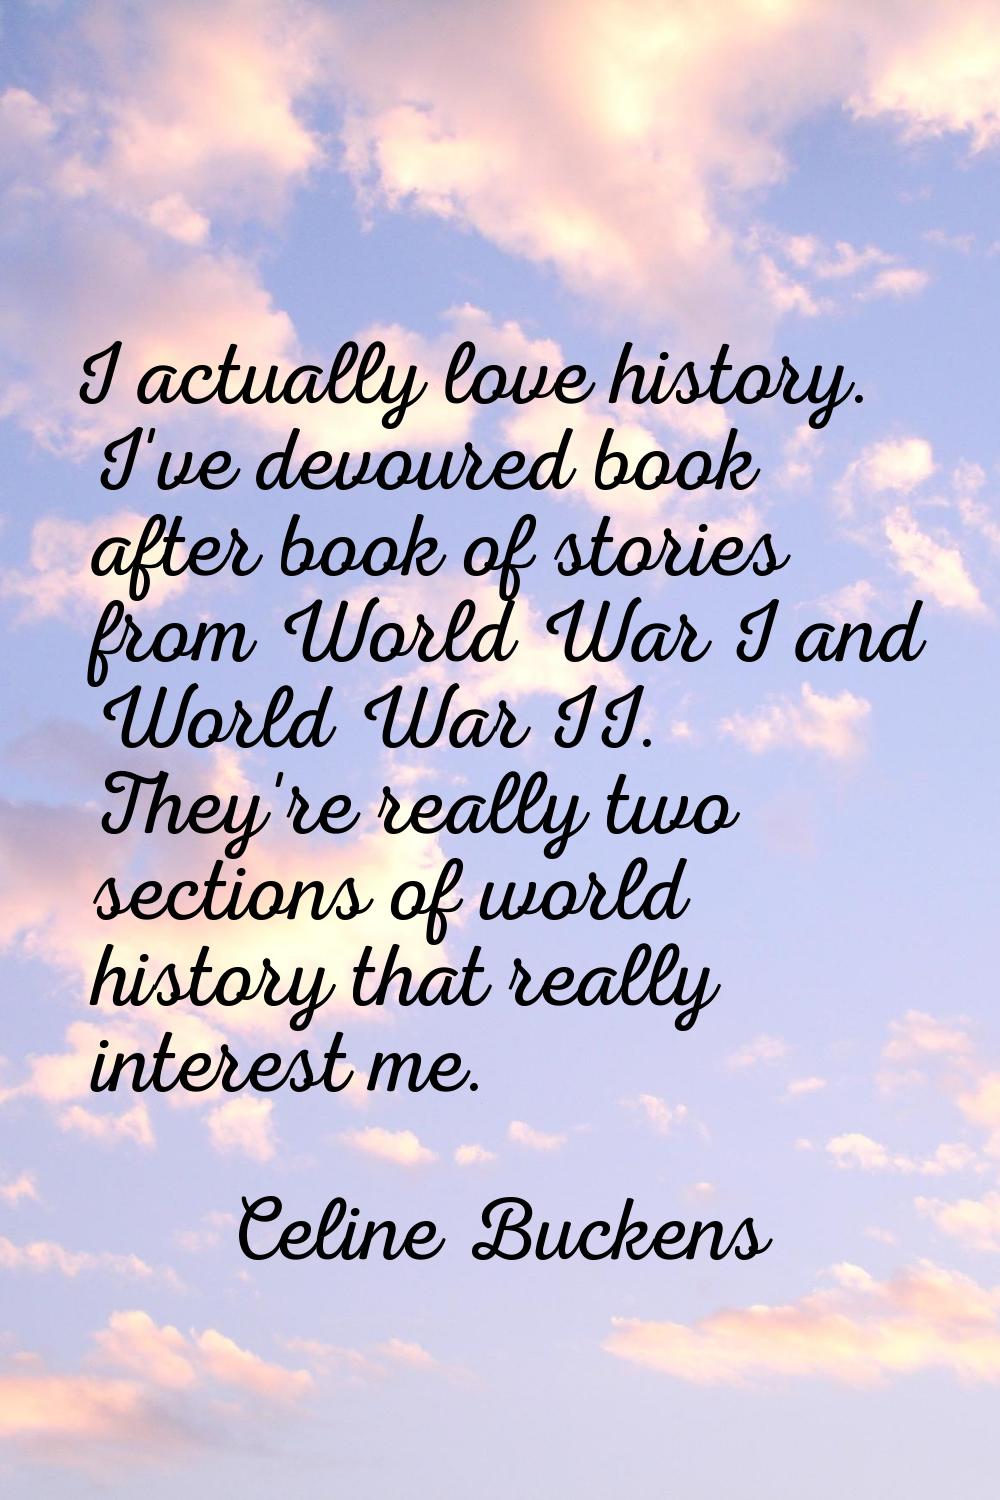 I actually love history. I've devoured book after book of stories from World War I and World War II